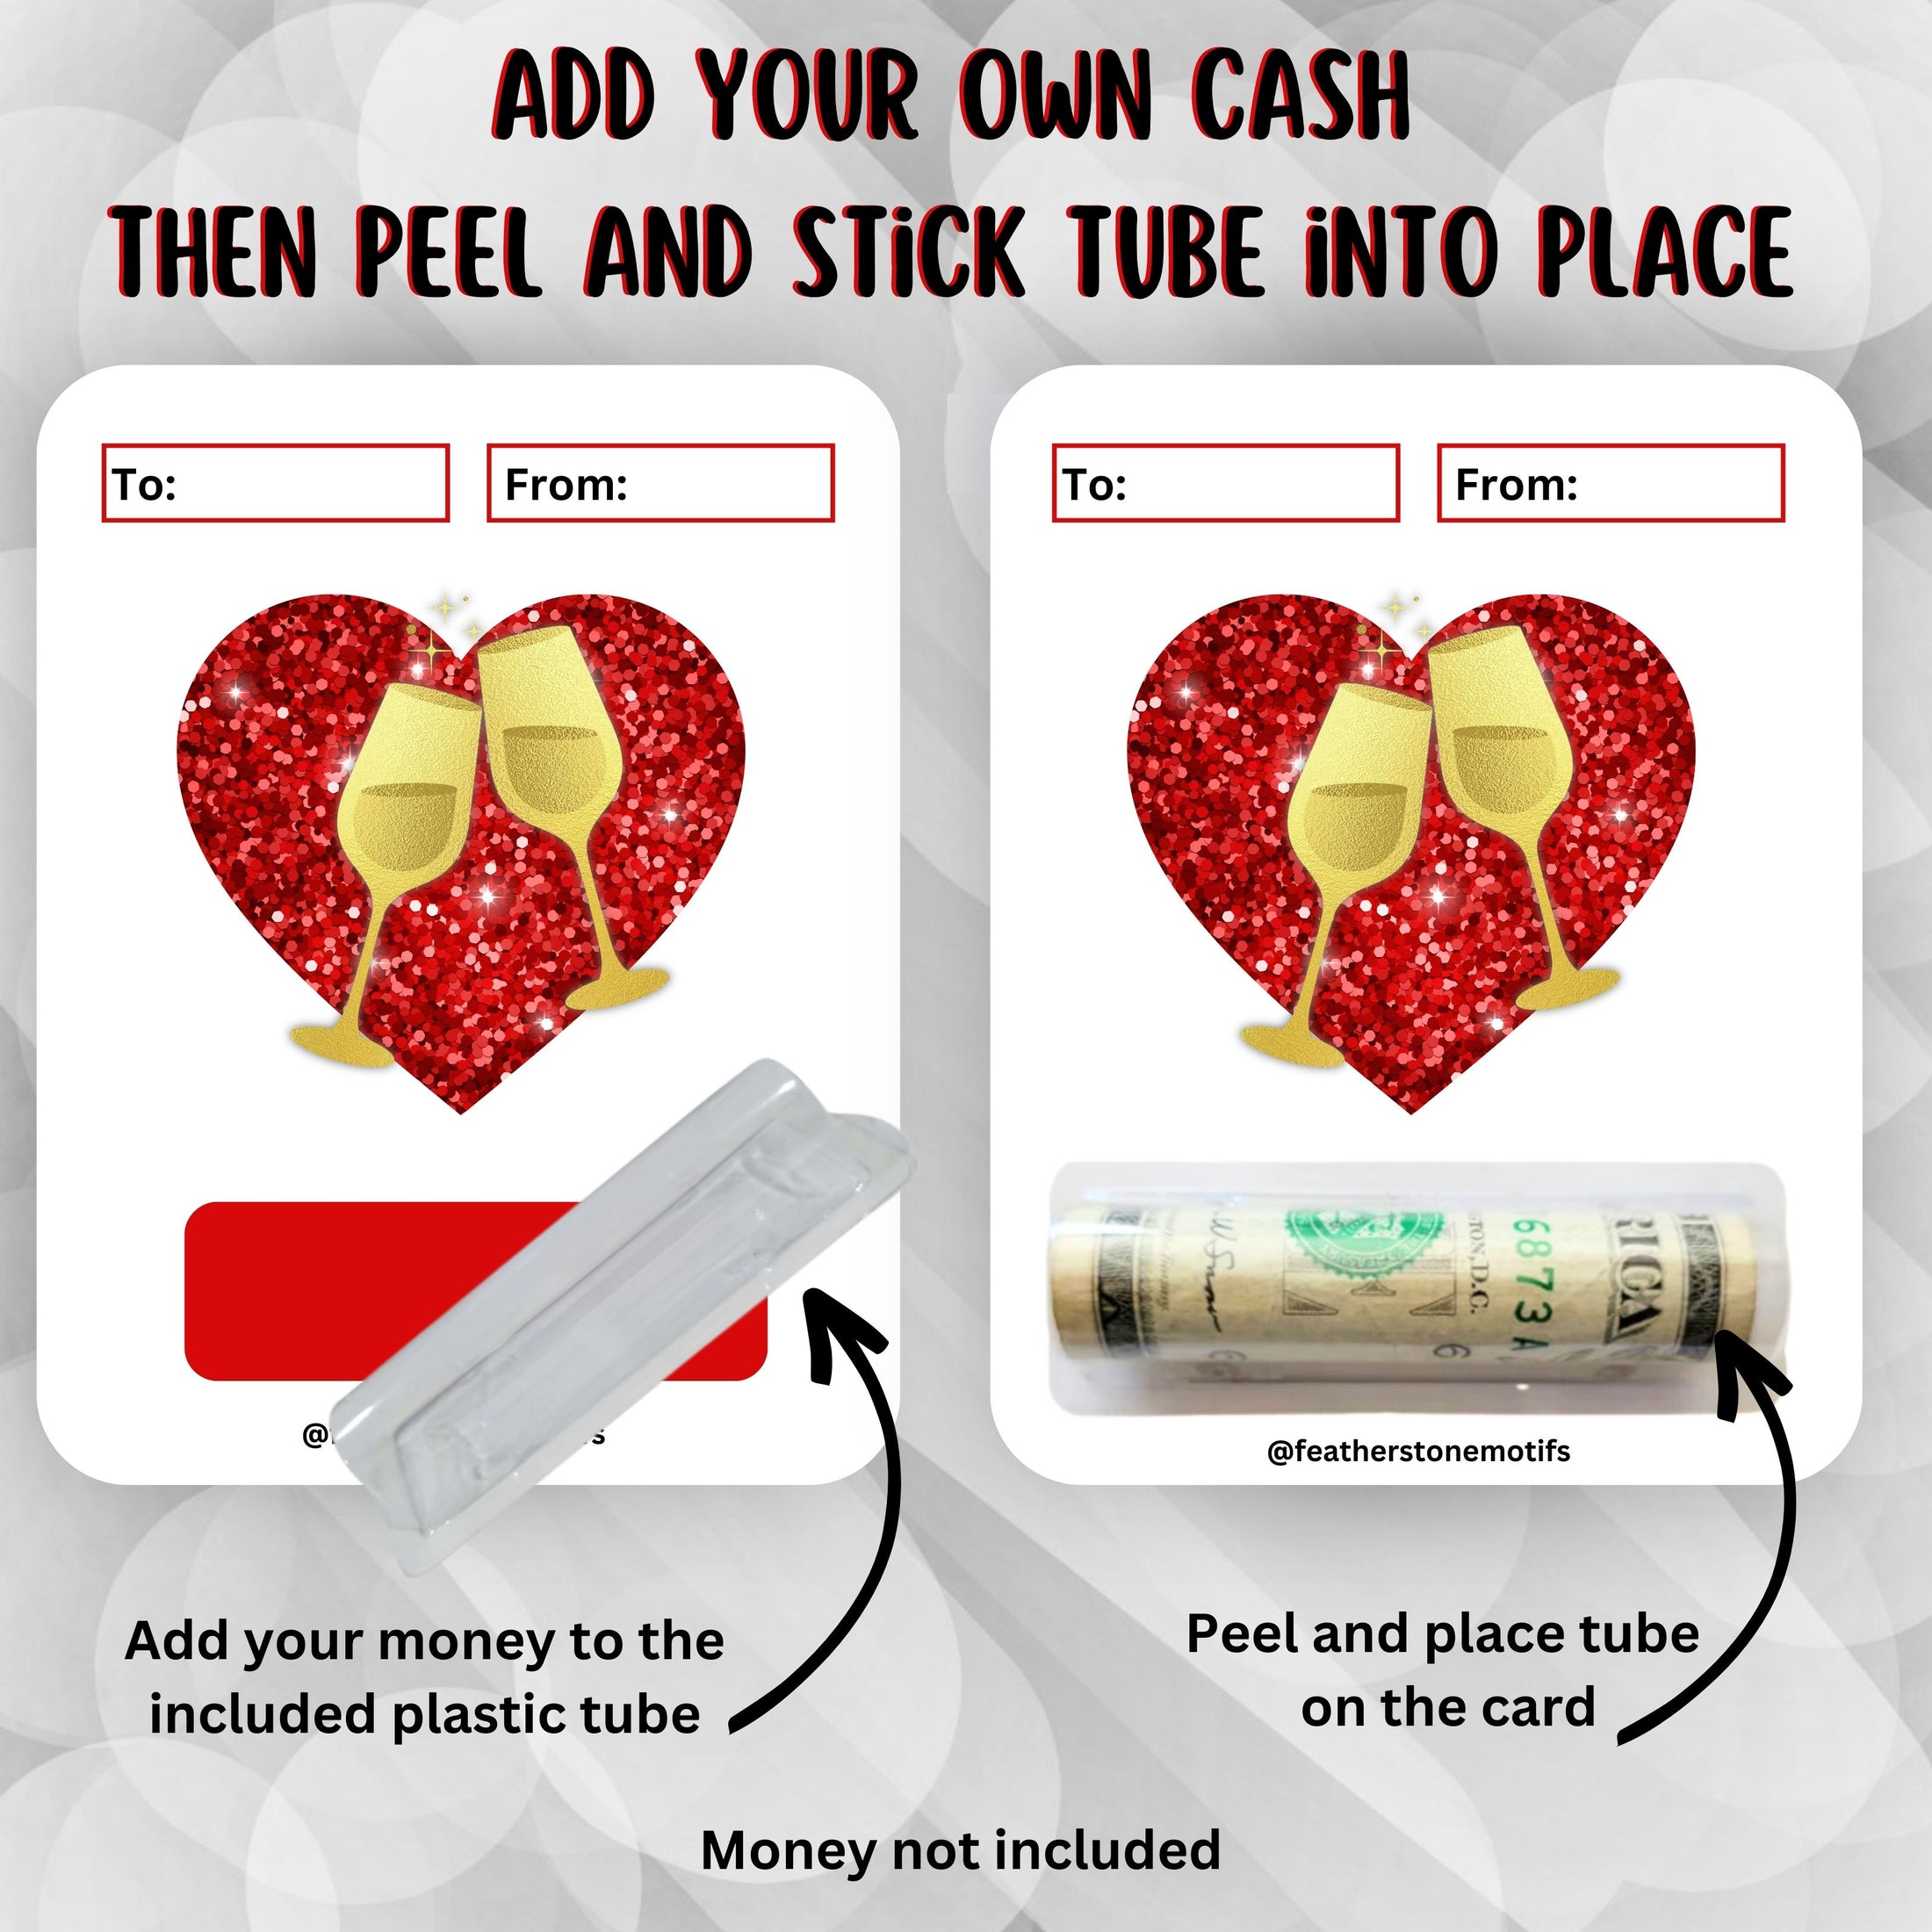 This image shows how to attach the money tube to the Cheers Money Card.